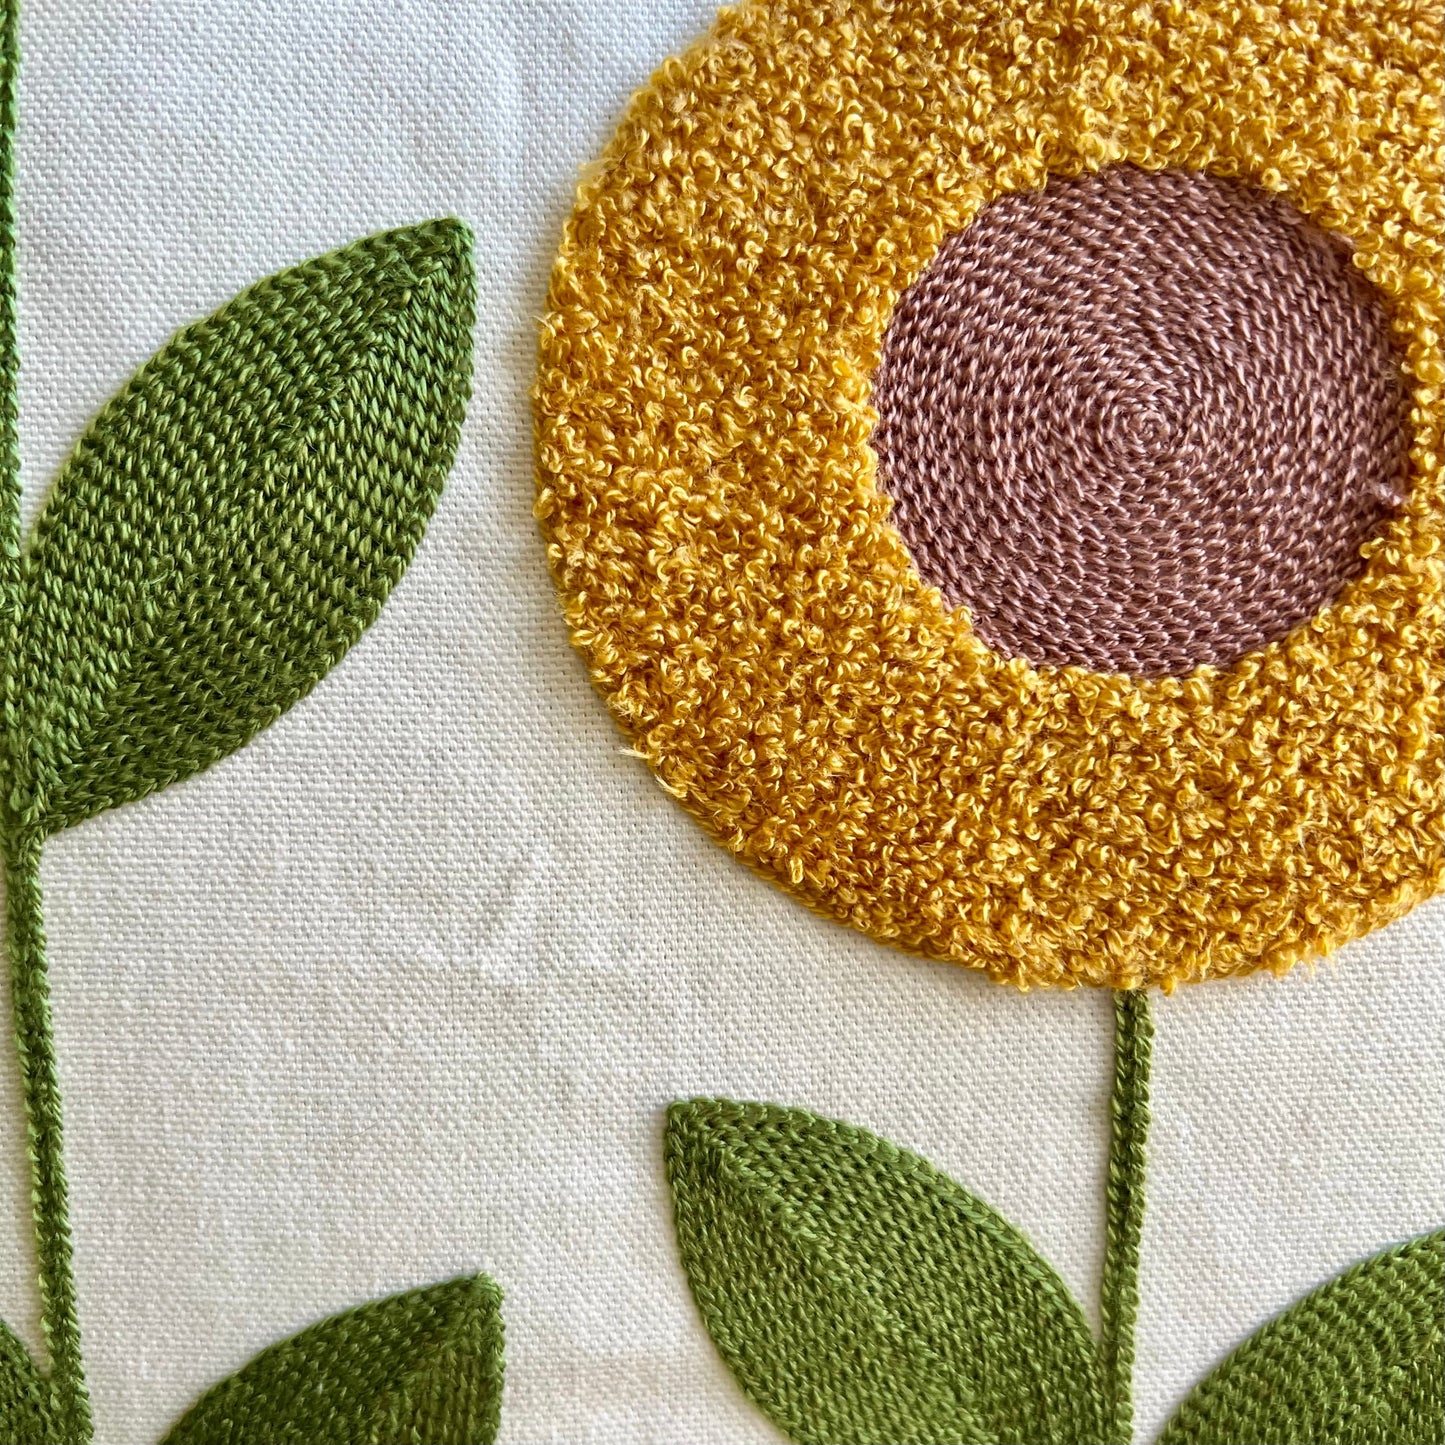 Sunflower Embroidered Throw Pillow Cover